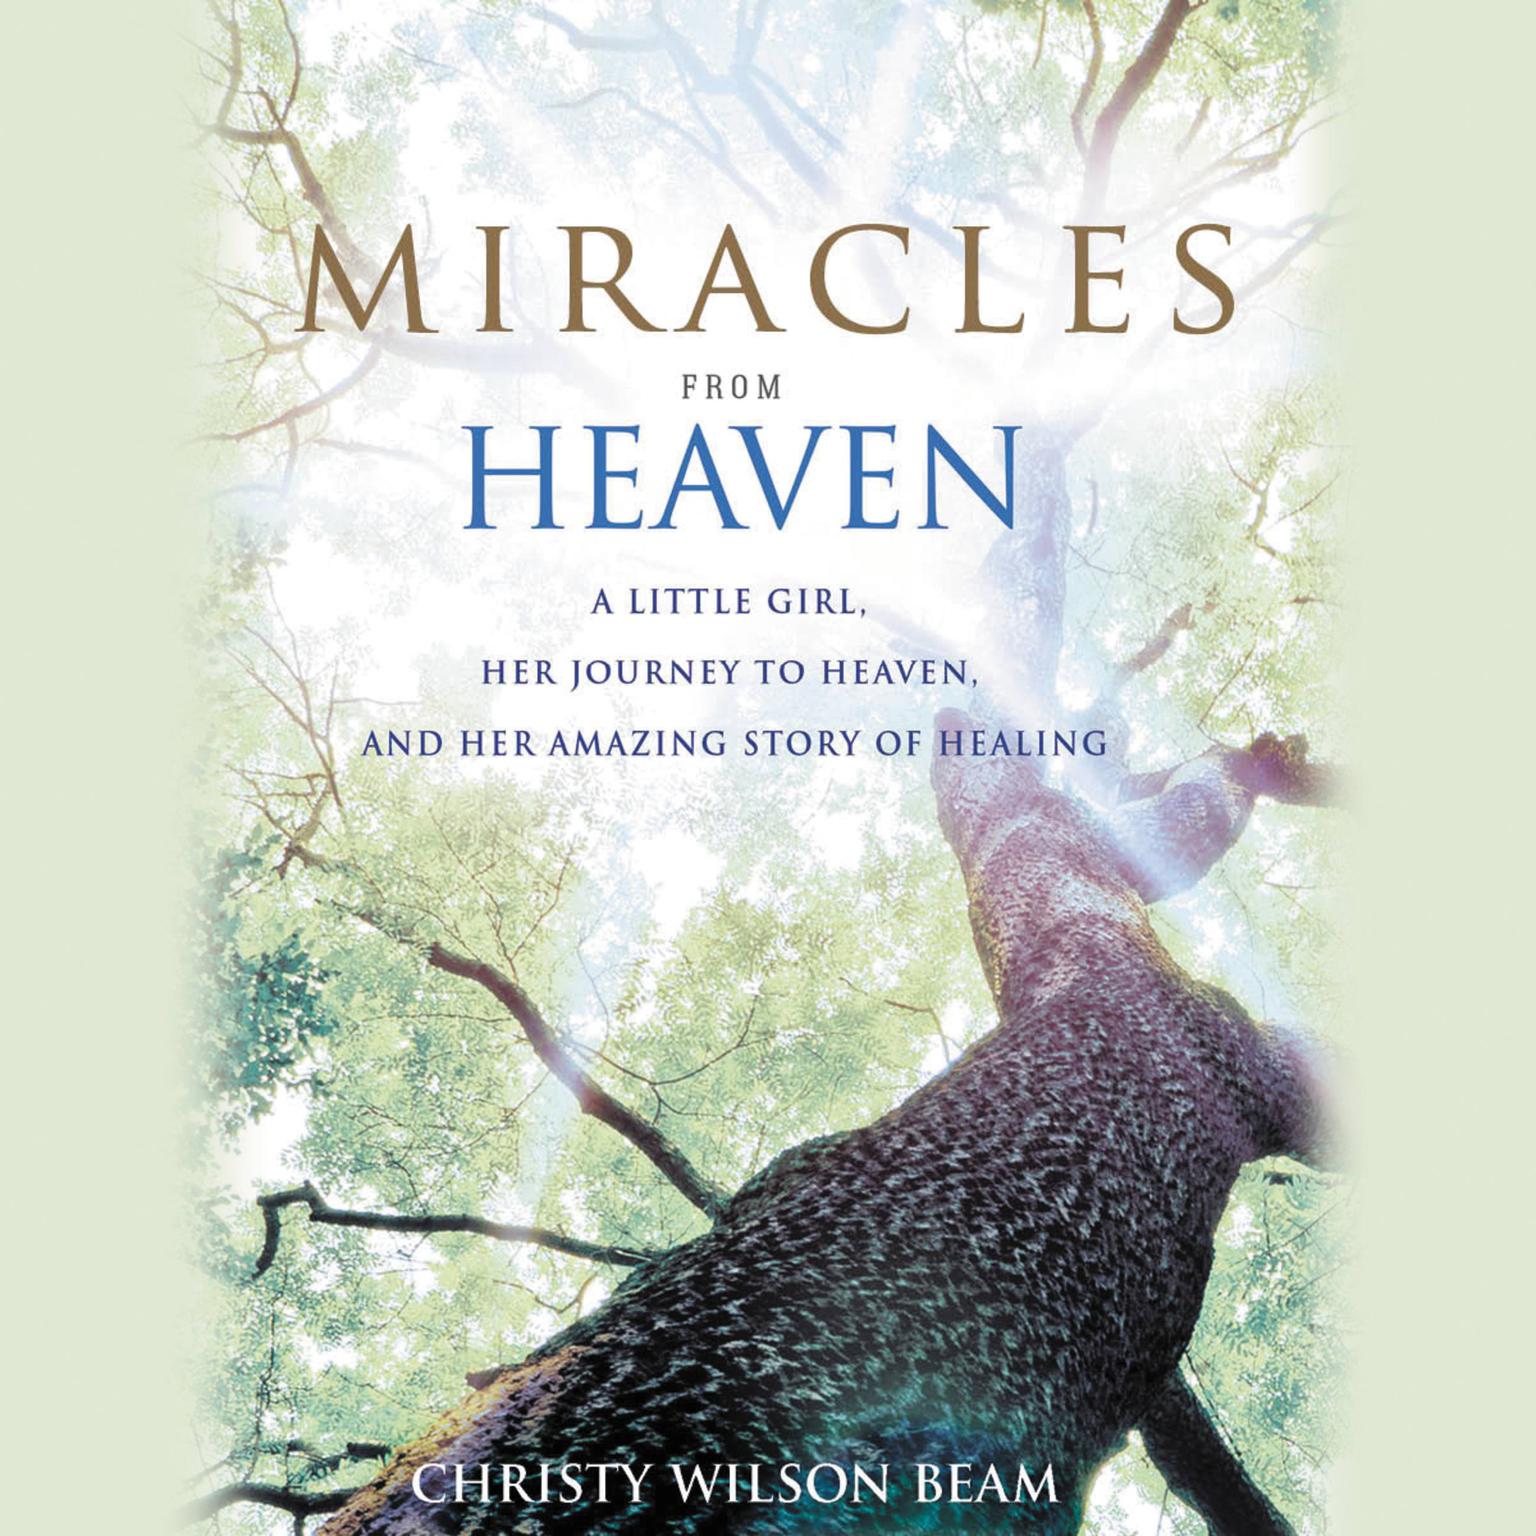 Miracles from Heaven: A Little Girl, Her Journey to Heaven, and Her Amazing Story of Healing Audiobook, by Christy Wilson Beam